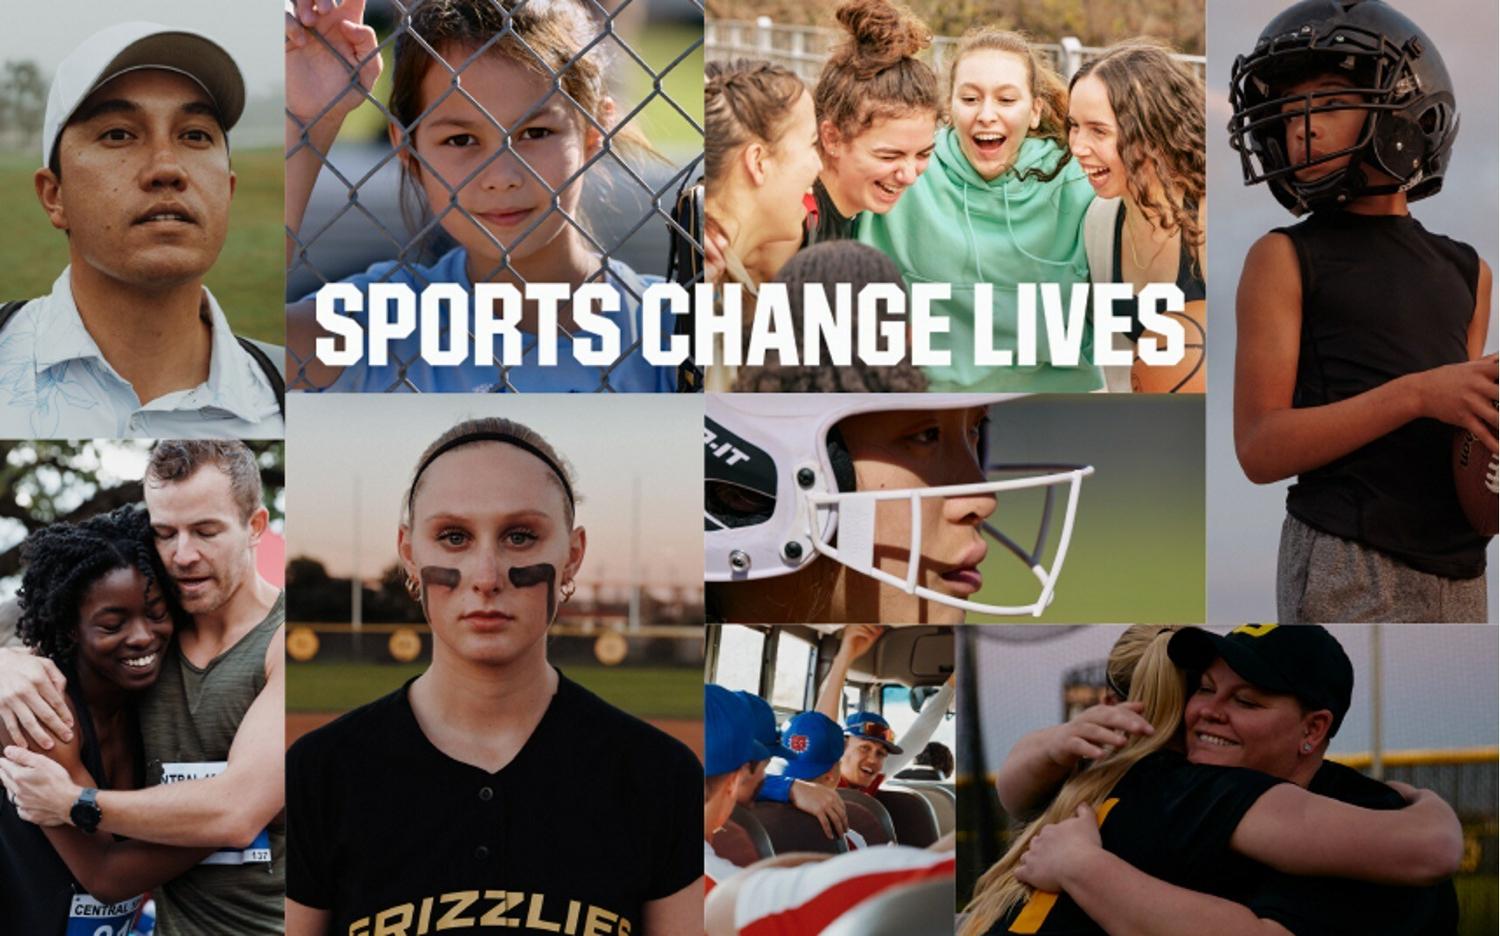 A photo collage of people playing sports with the words "sports change lives" overlaid.